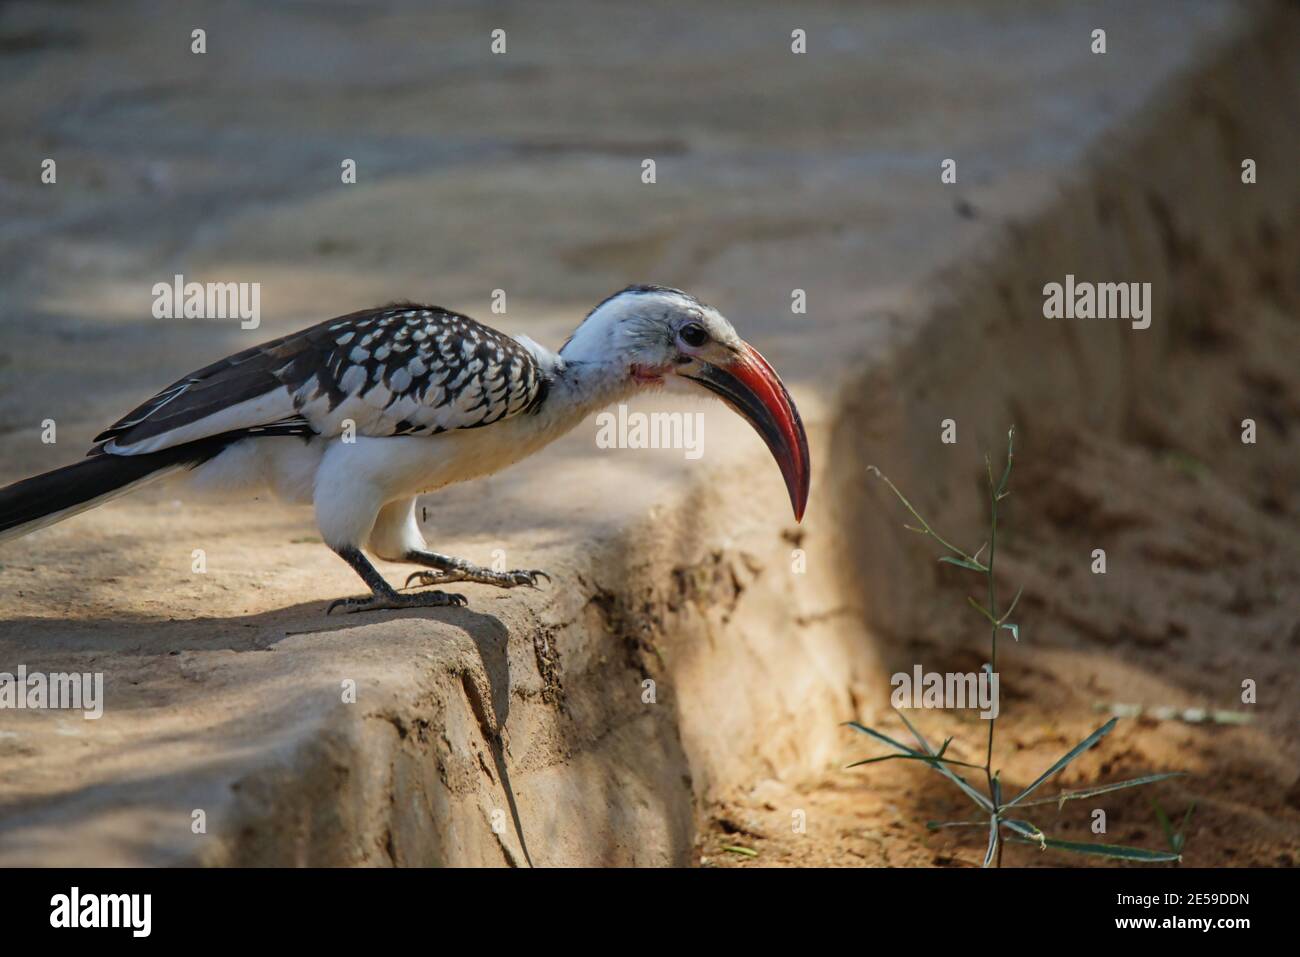 A Red-billed hornbill stands on the platform. A grass is in front of its beak. Large numbers of animals migrate to the Masai Mara National Wildlife Re Stock Photo